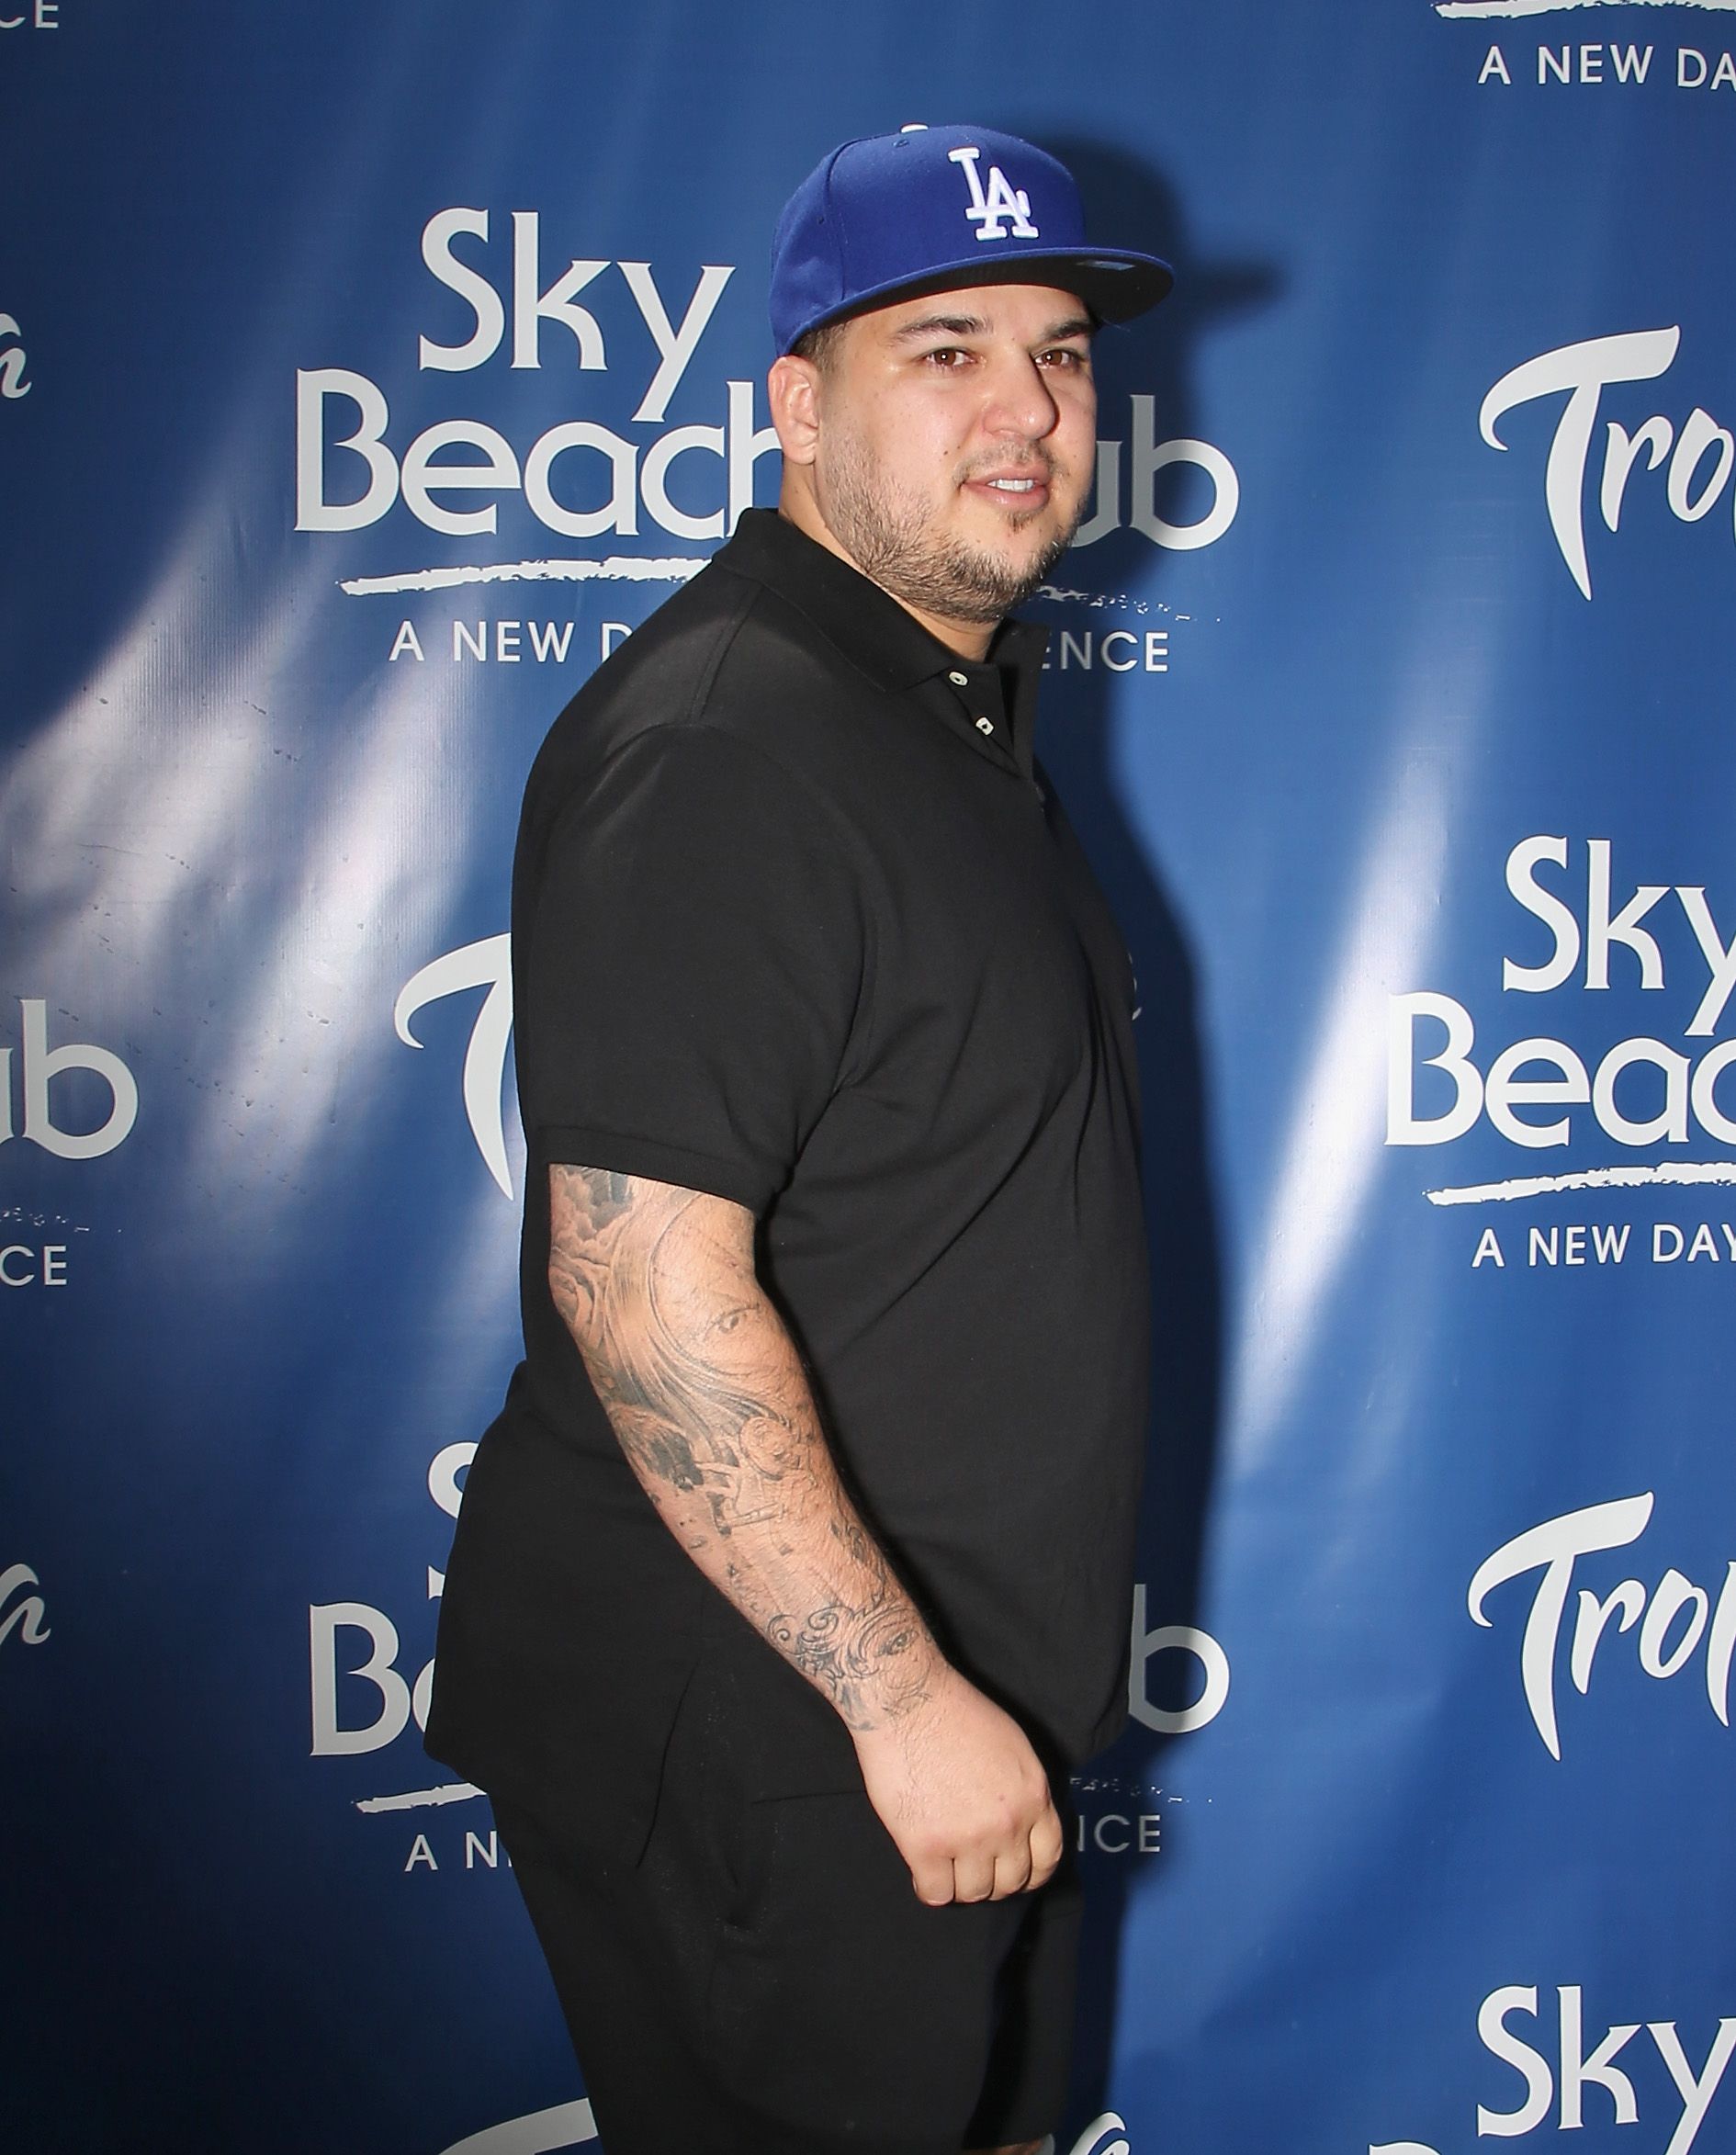 Rob Kardashian arrives at an event for the Sky Beach Club, in Las Vegas, Nevada on May 28, 2016 | Source: Gabe Ginsberg/Getty Images